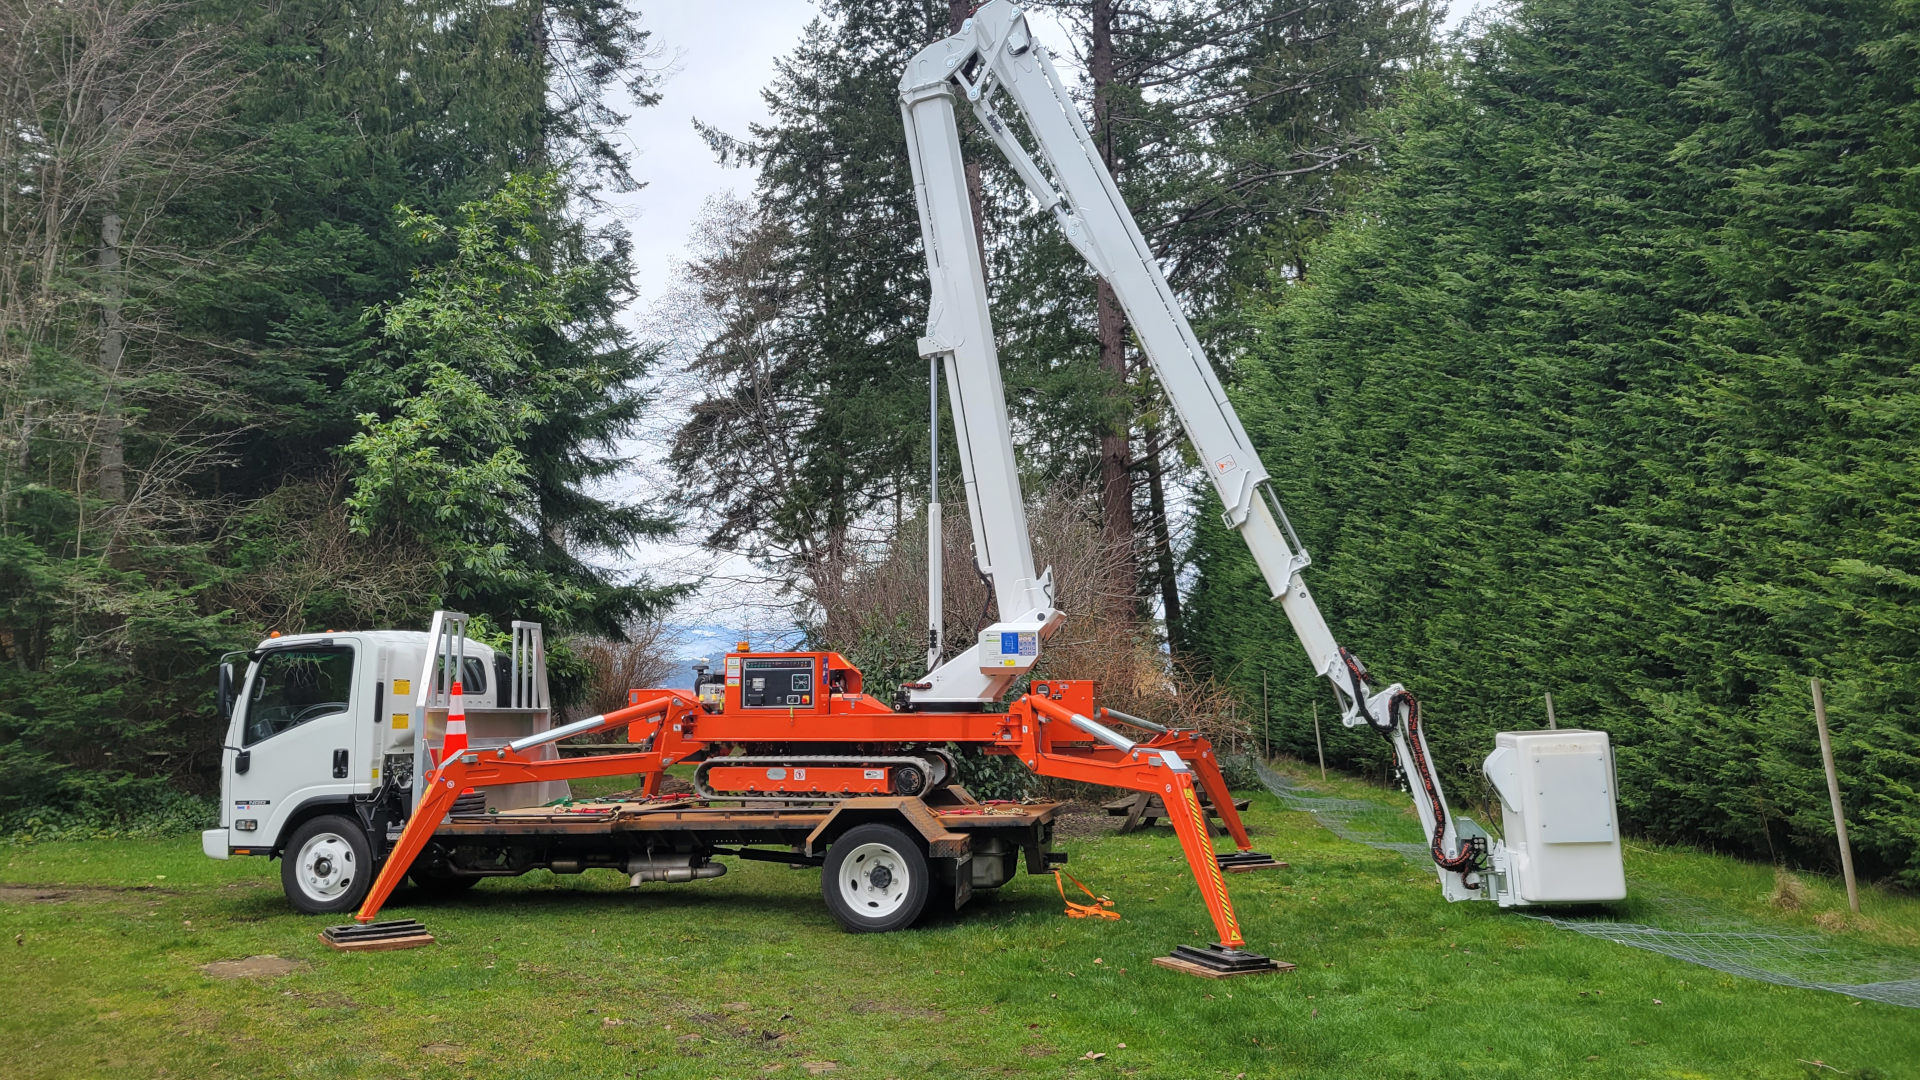 Spider Lift opened on lawn in Comox